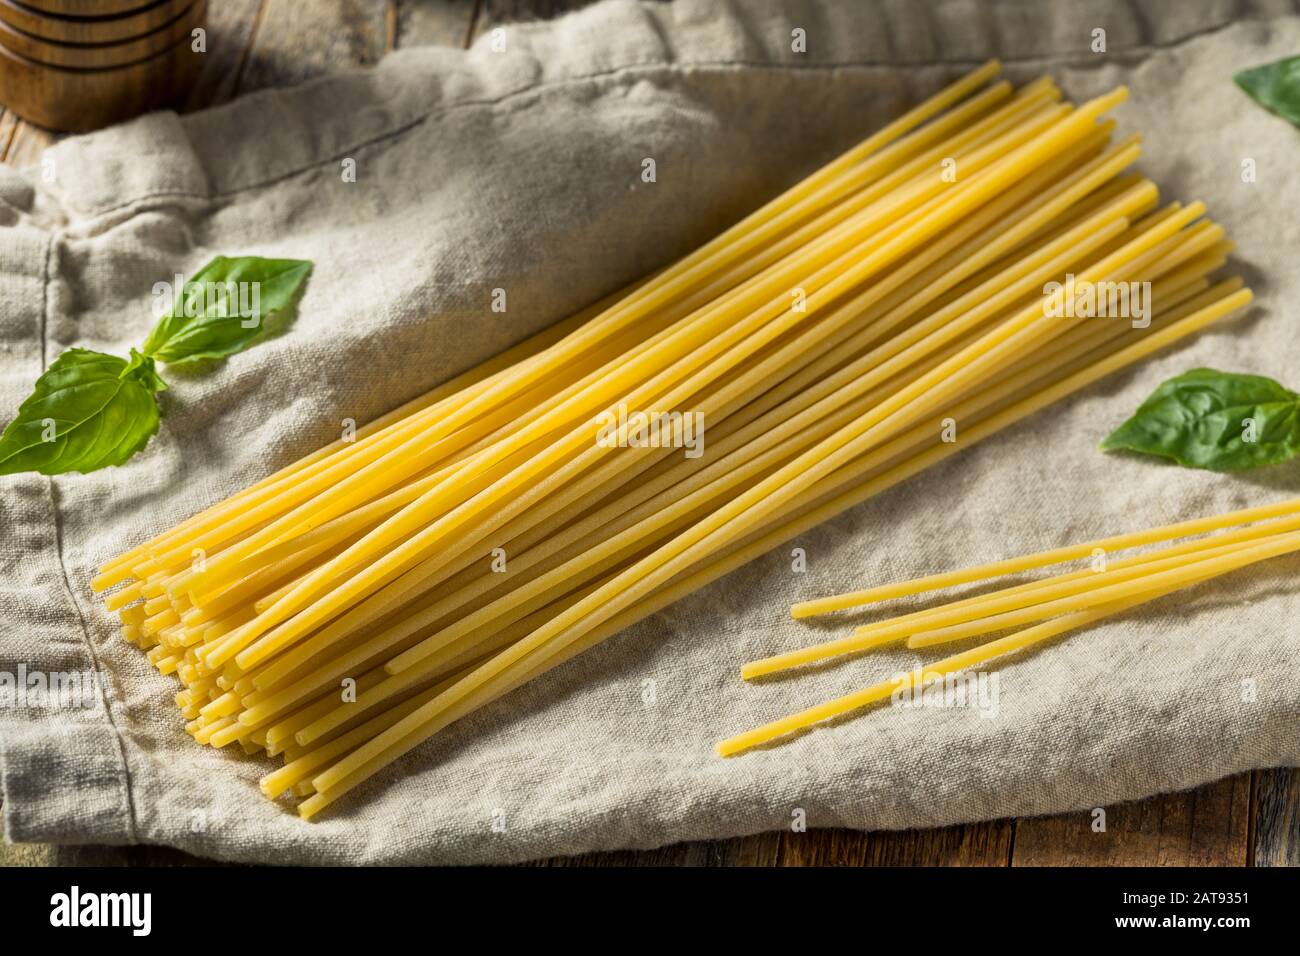 https://c8.alamy.com/comp/2AT9351/raw-organic-bucatini-pasta-in-a-bunch-2AT9351.jpg